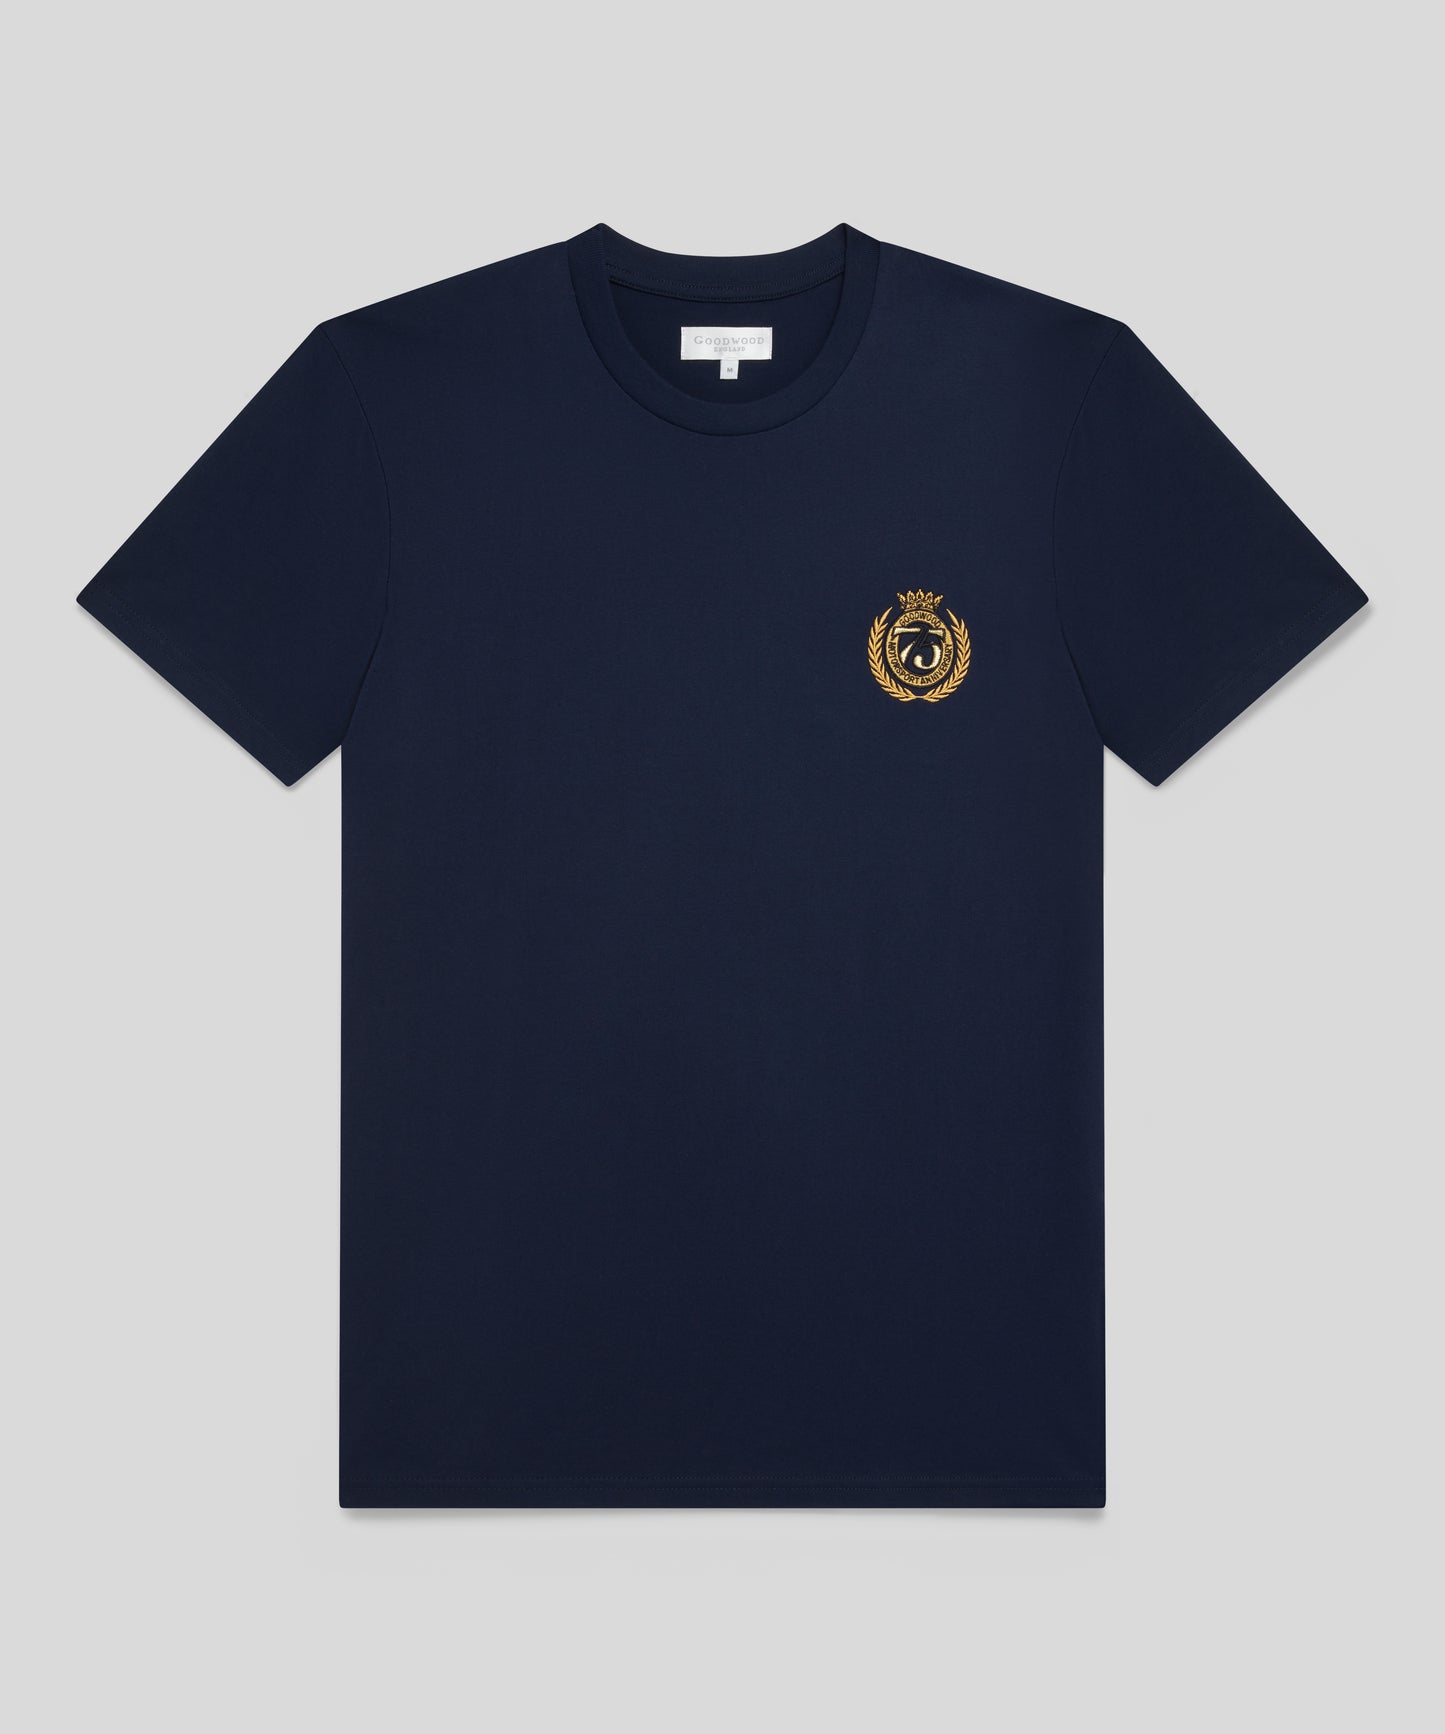 Goodwood 75 Year Anniversary Embroidered T-Shirt